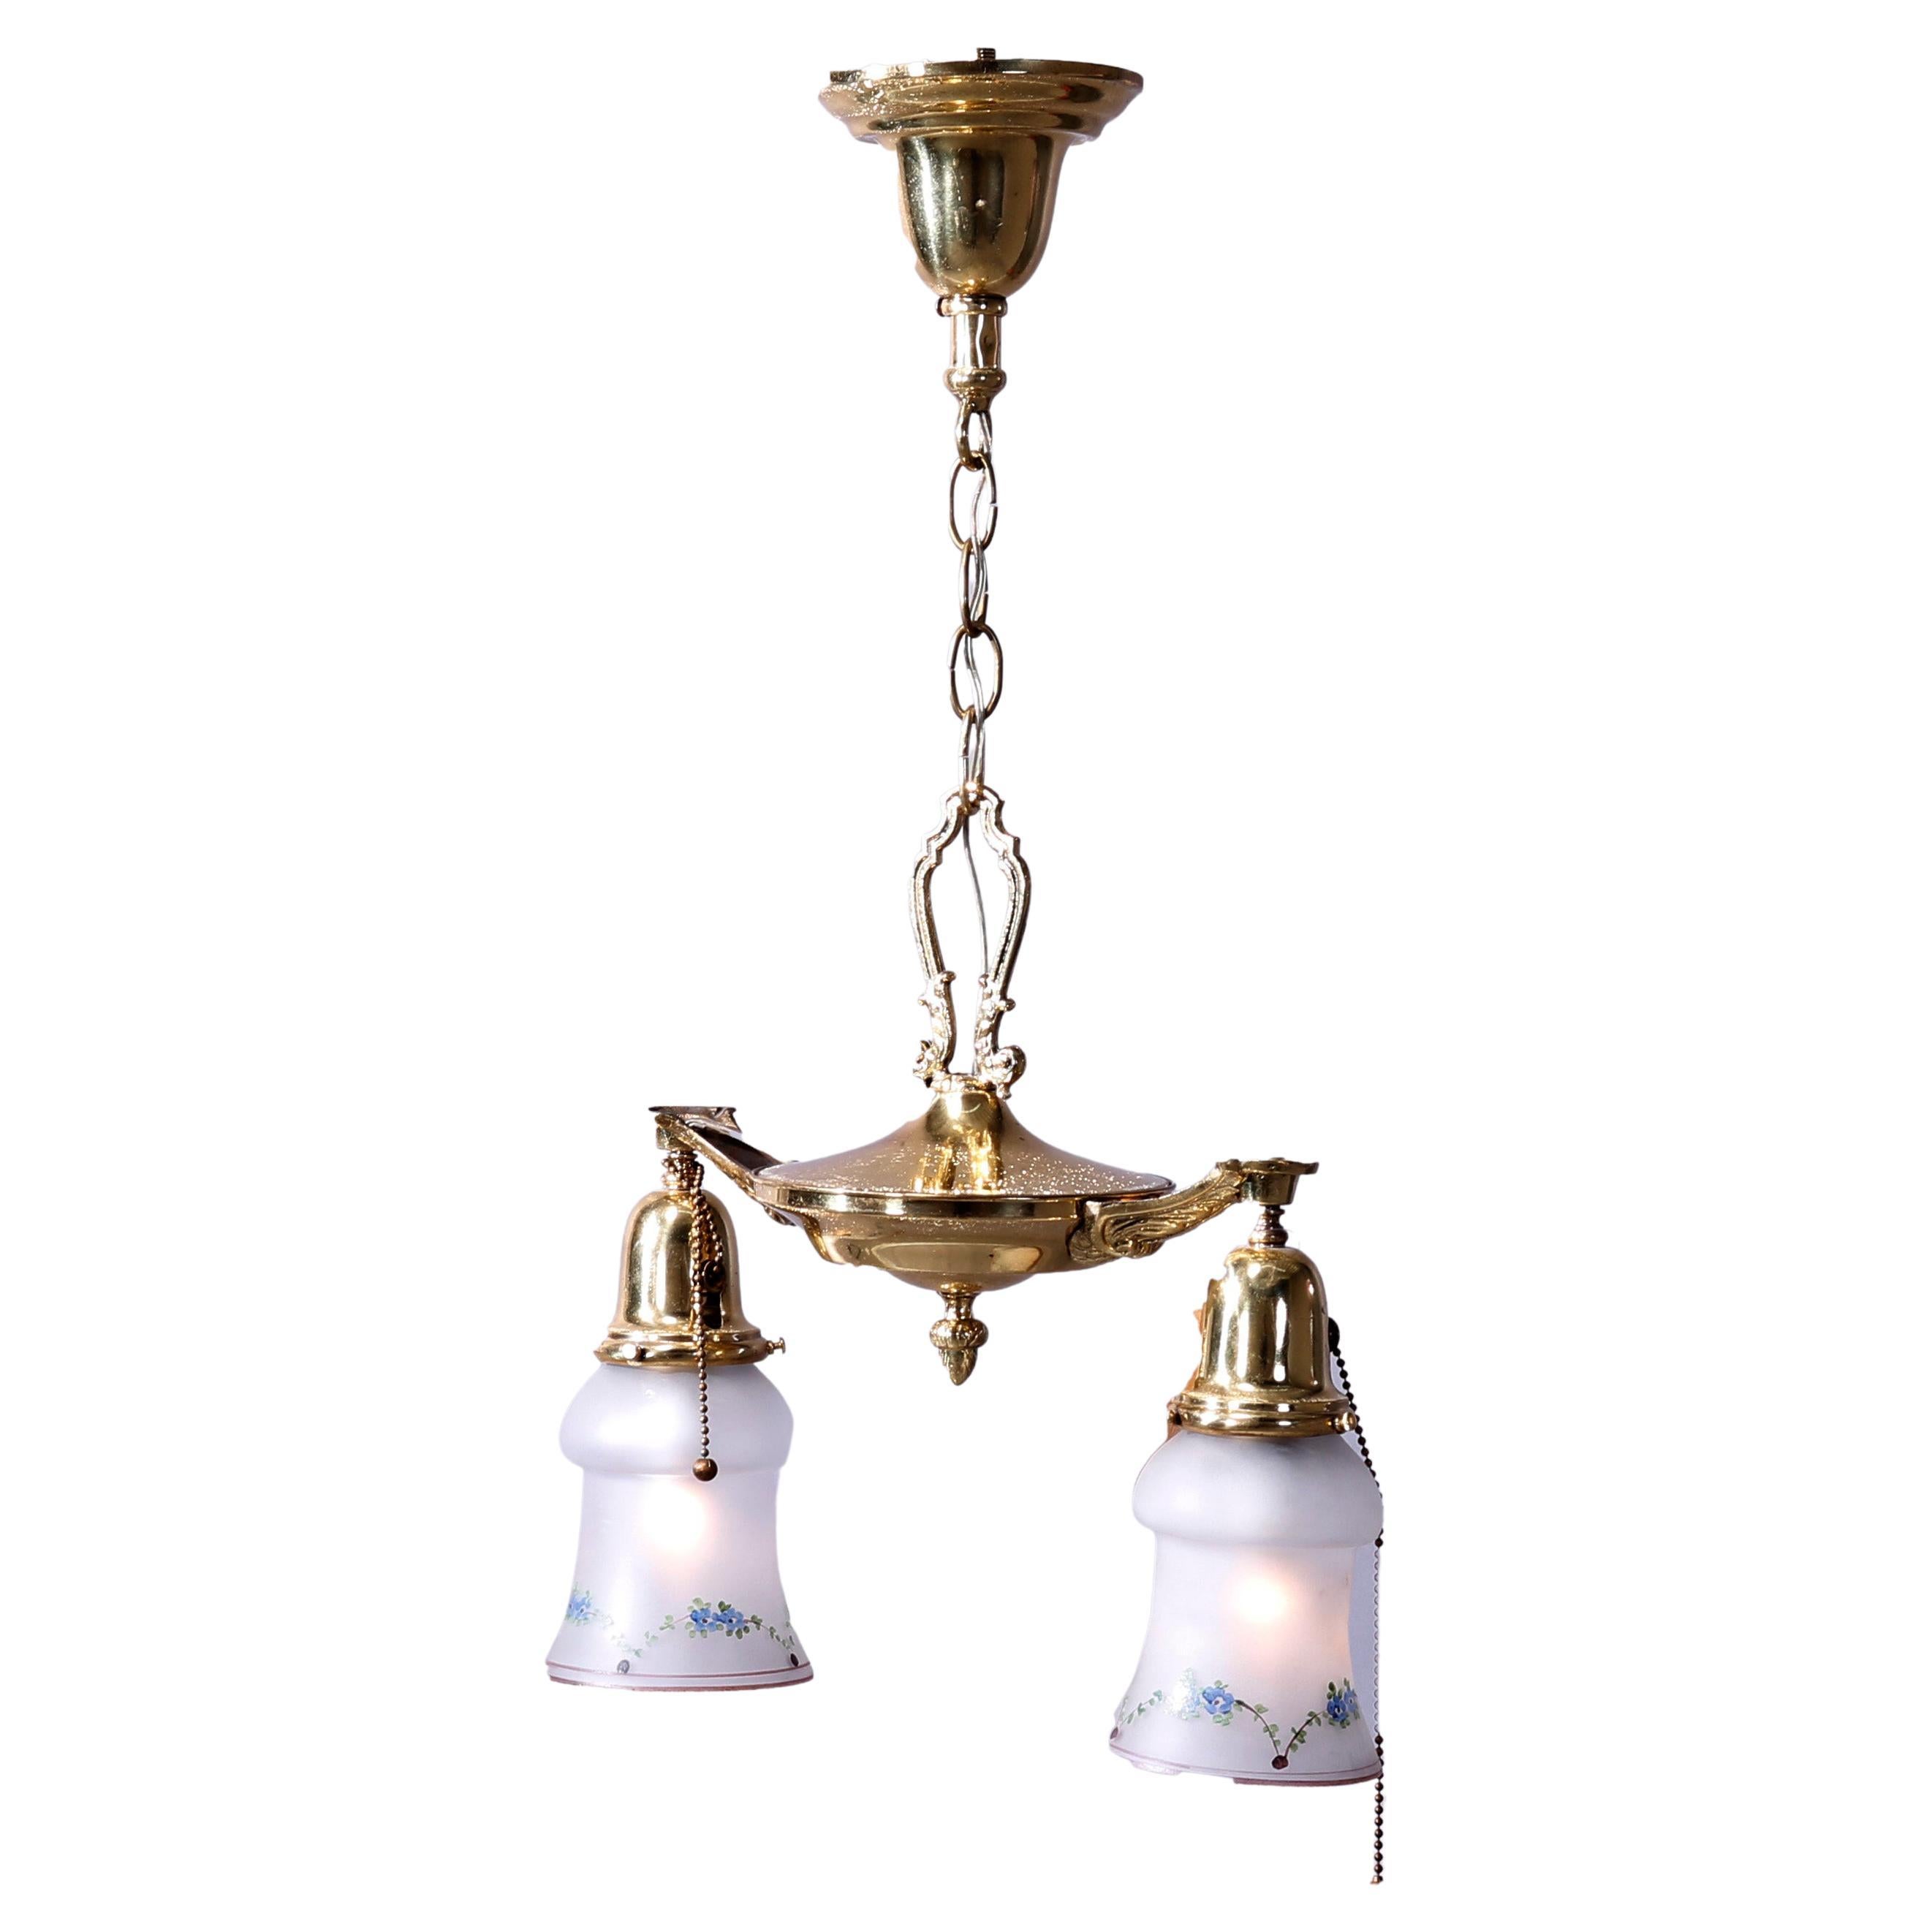 Antique Brass Two Drop-Light Hanging Ceiling Fixture, Circa 1920 For Sale